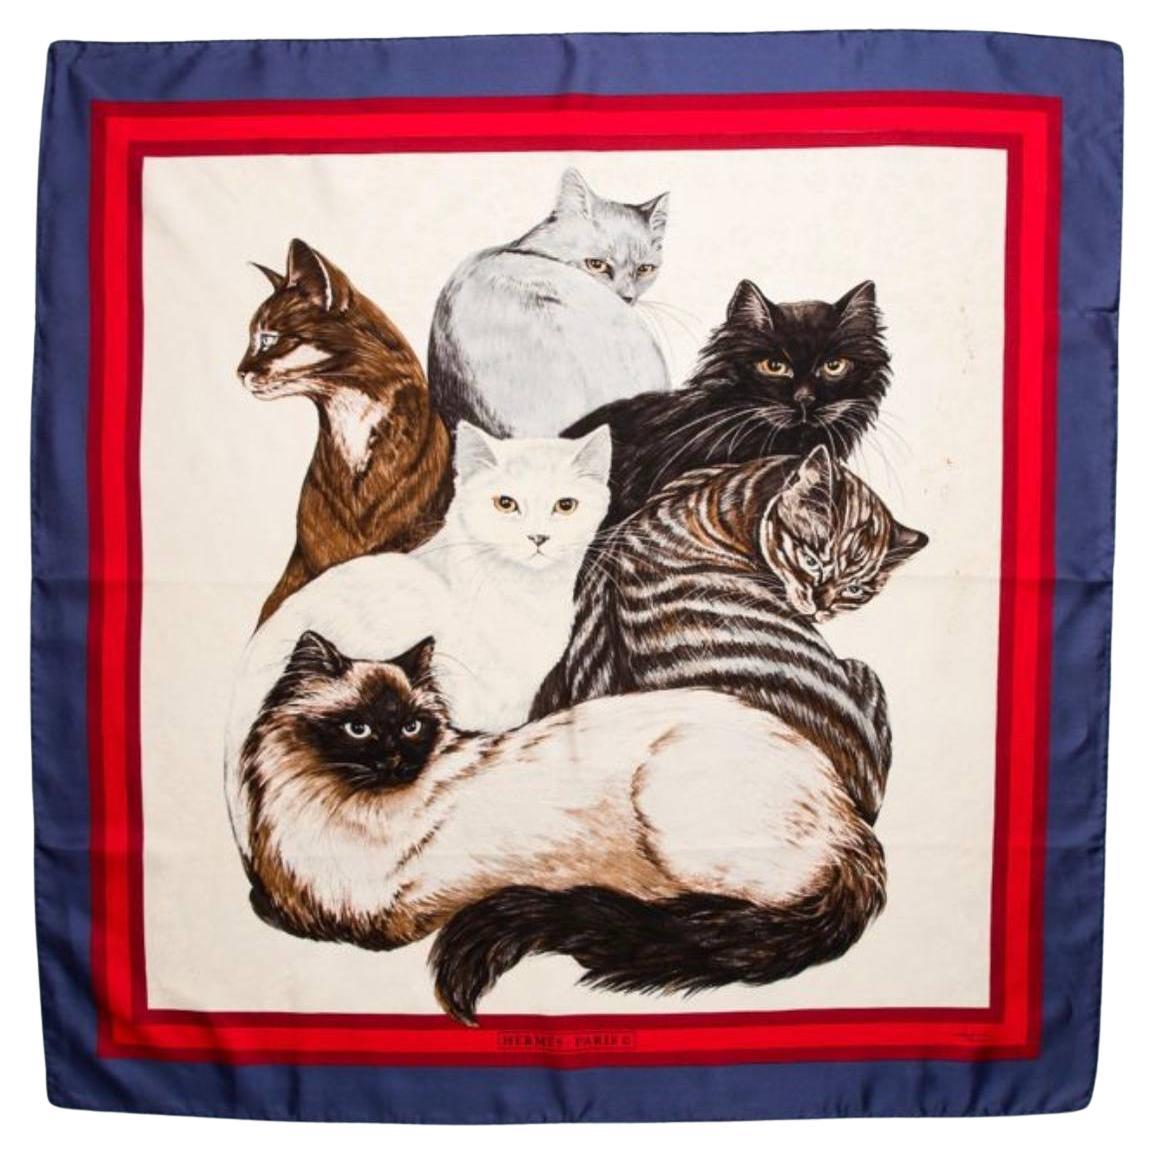 Vintage Hermes Les Chats Scarf by Daphne Duchesne 1985